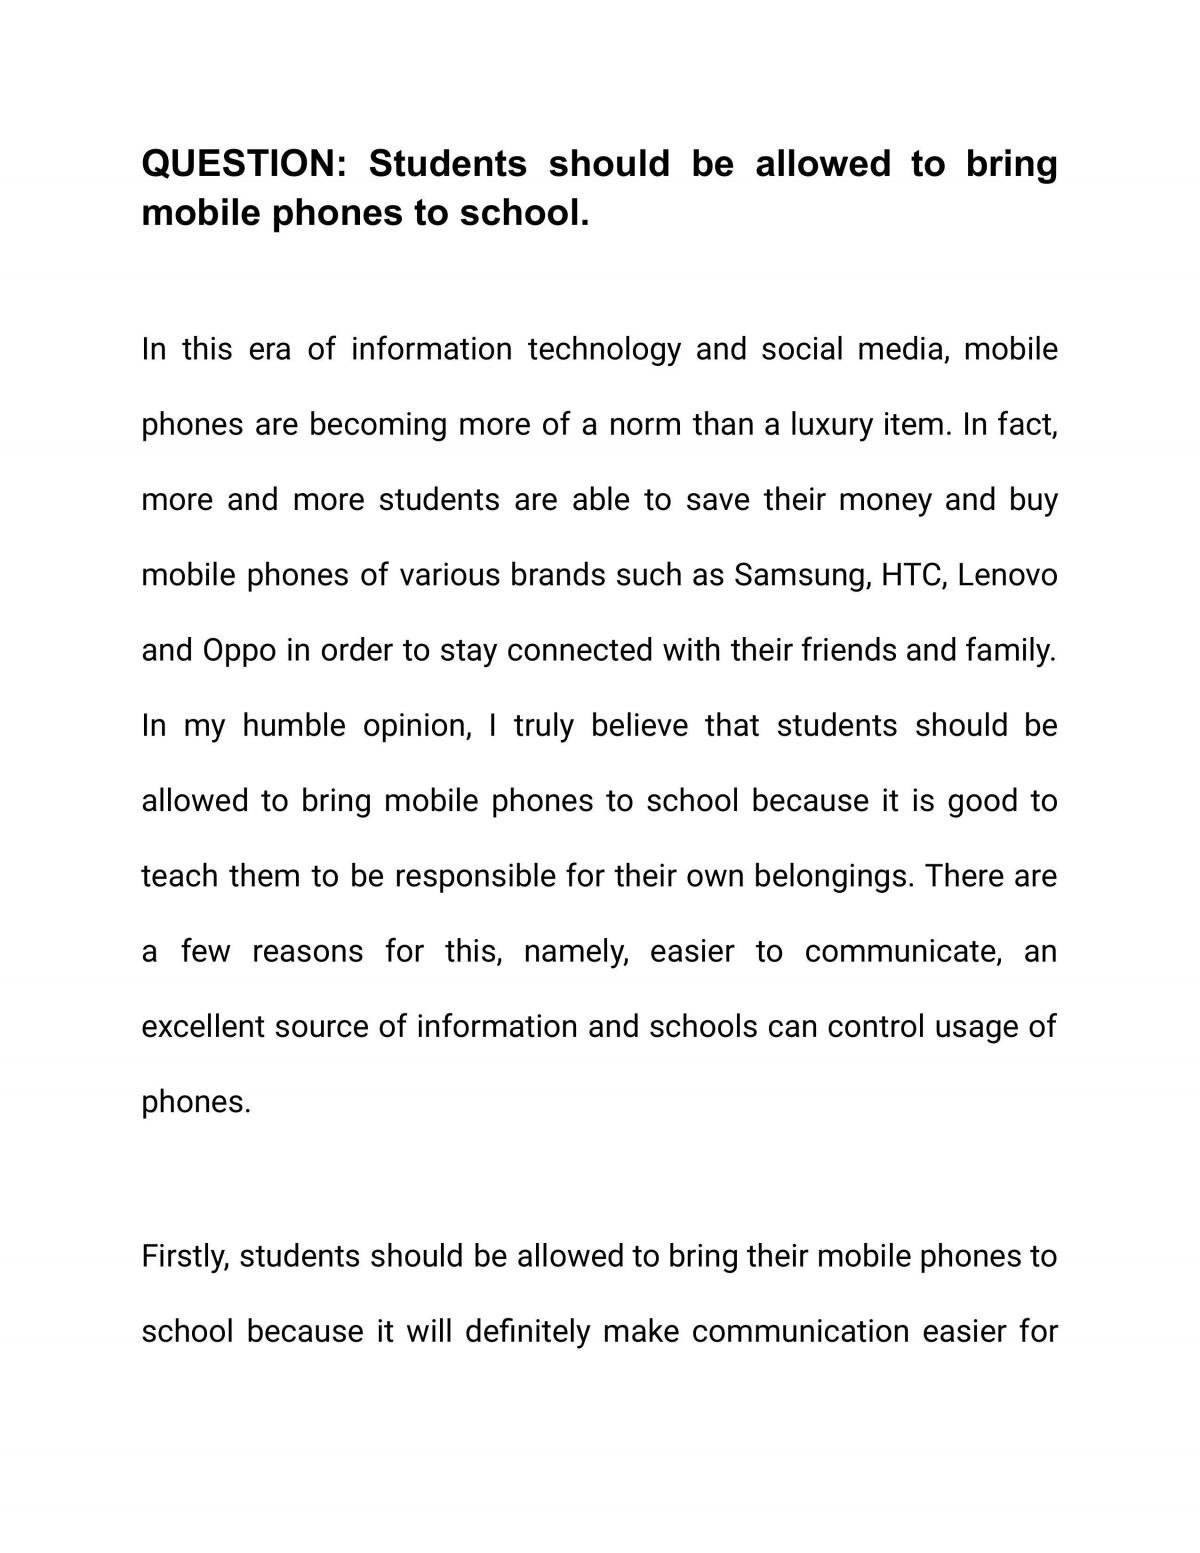 essay bring mobile phone to school